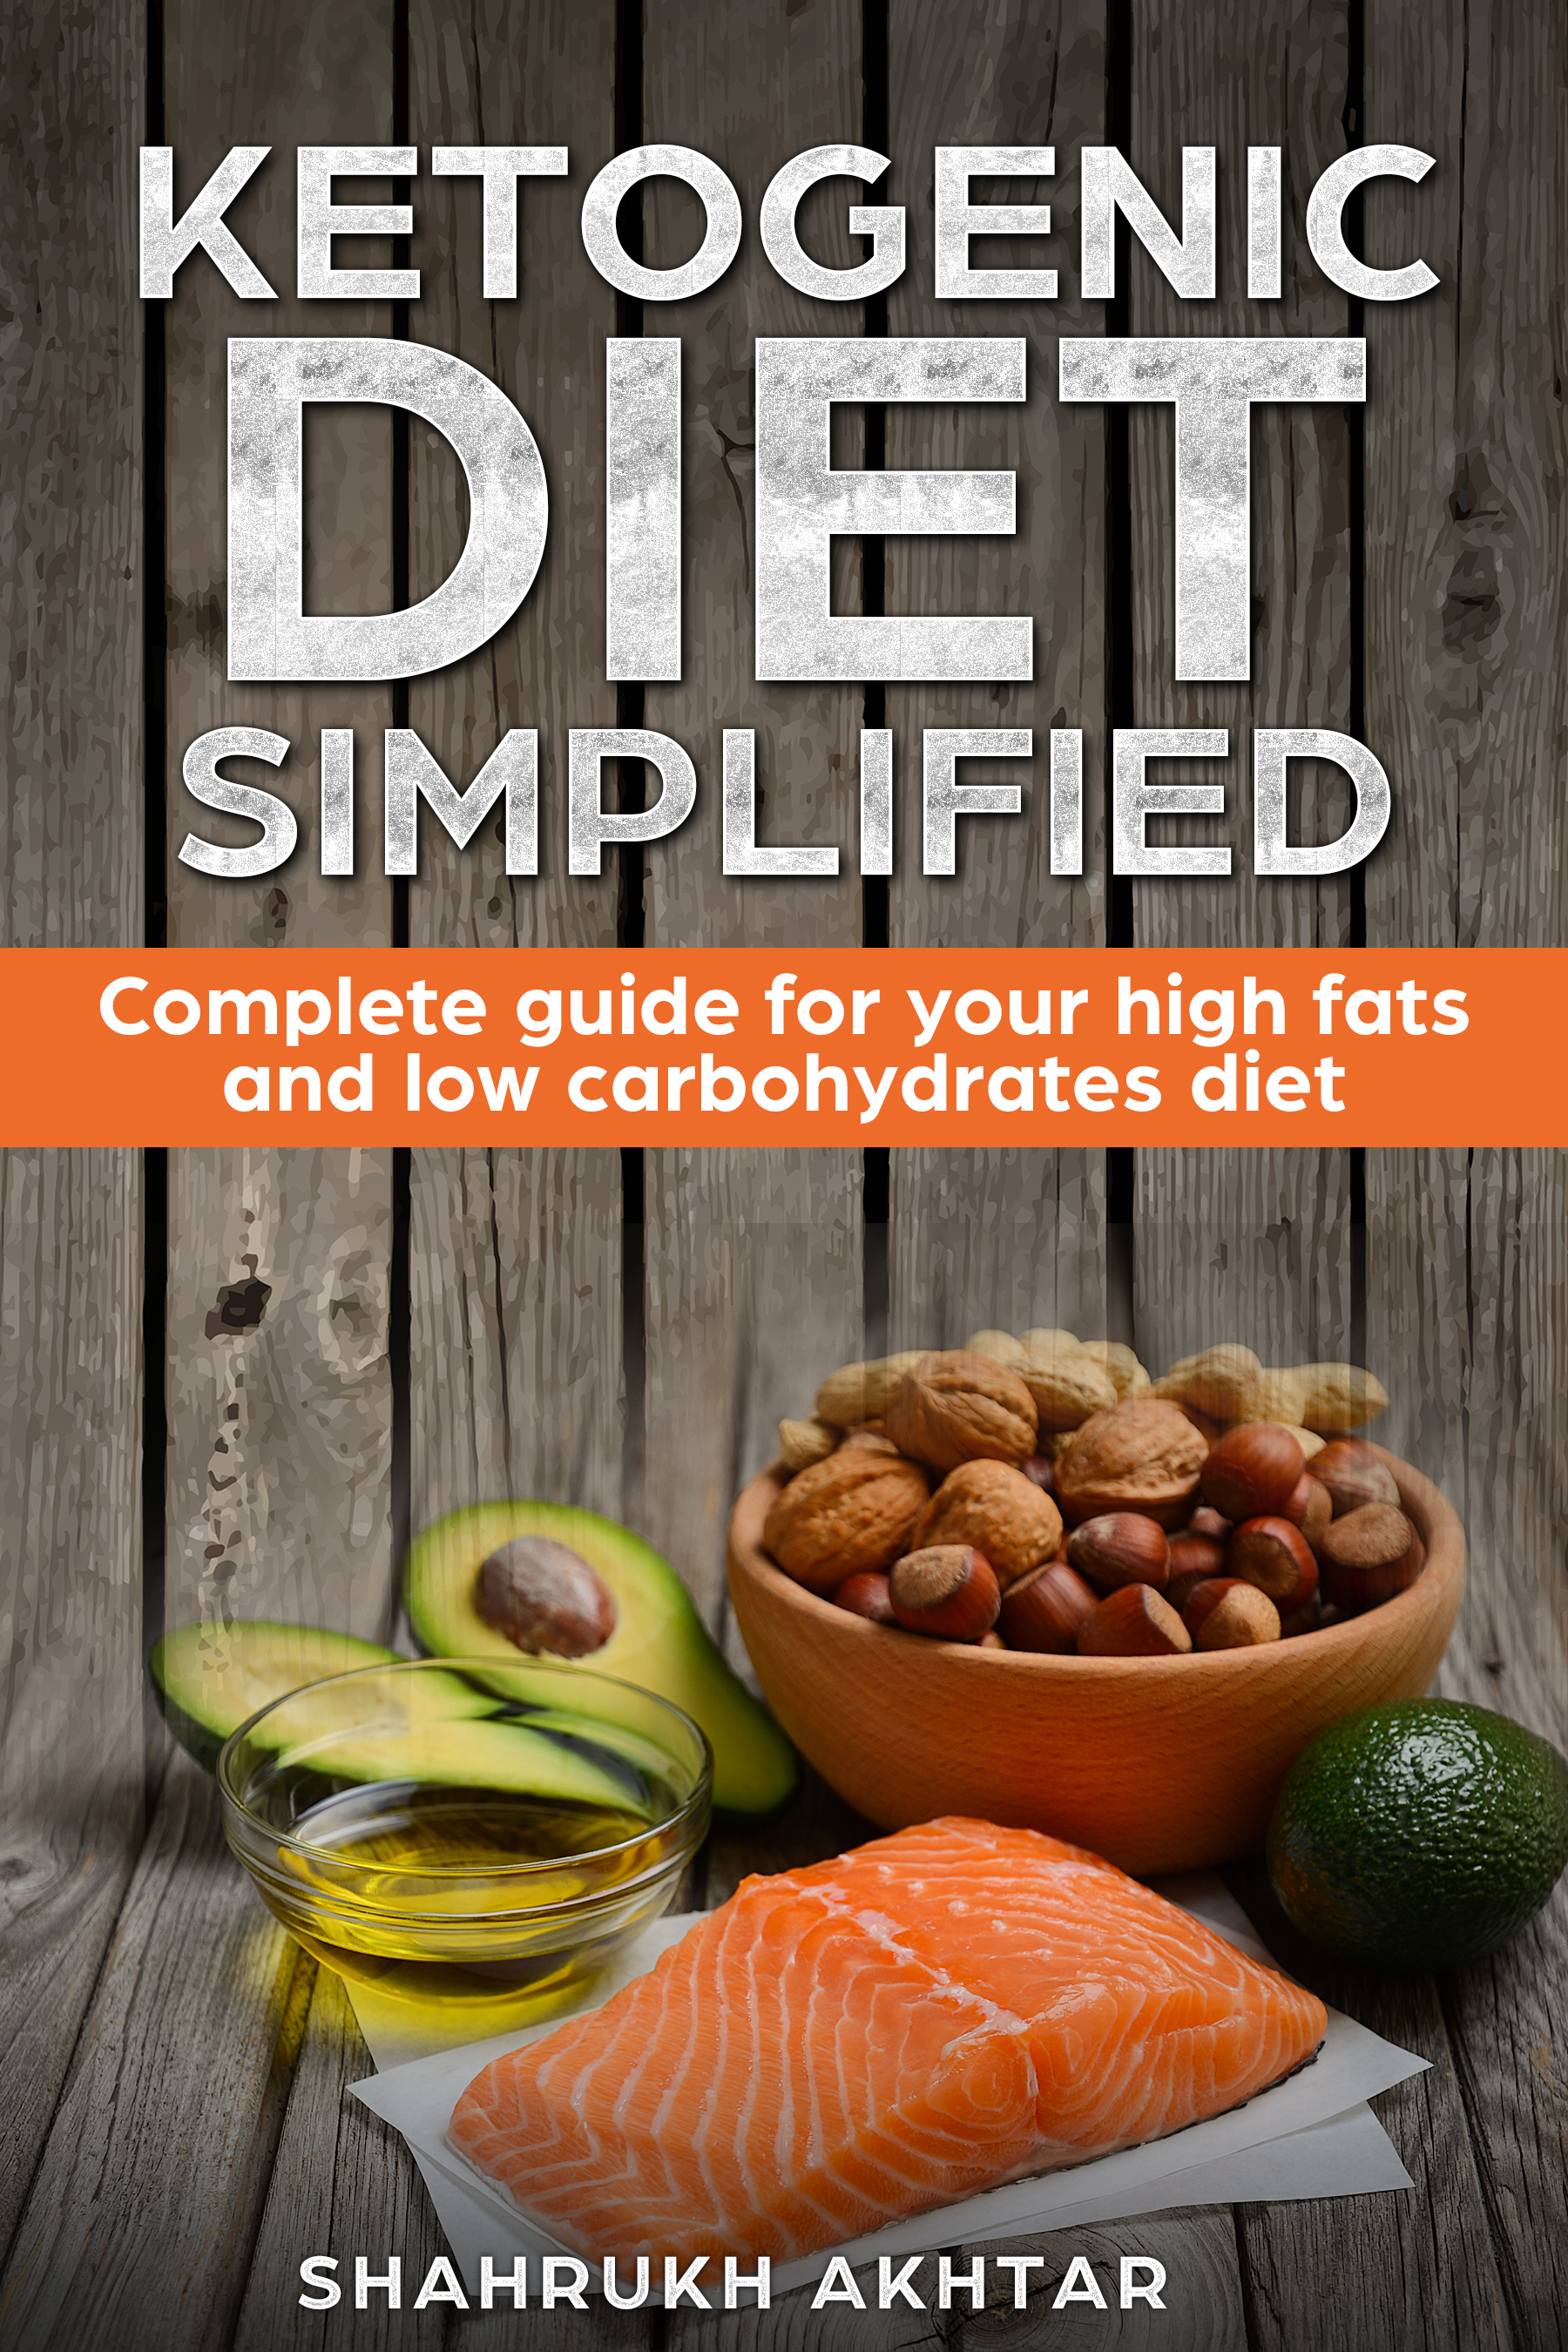 FREE: KETOGENIC DIET Simplified by SHAHRUKH AKHTAR